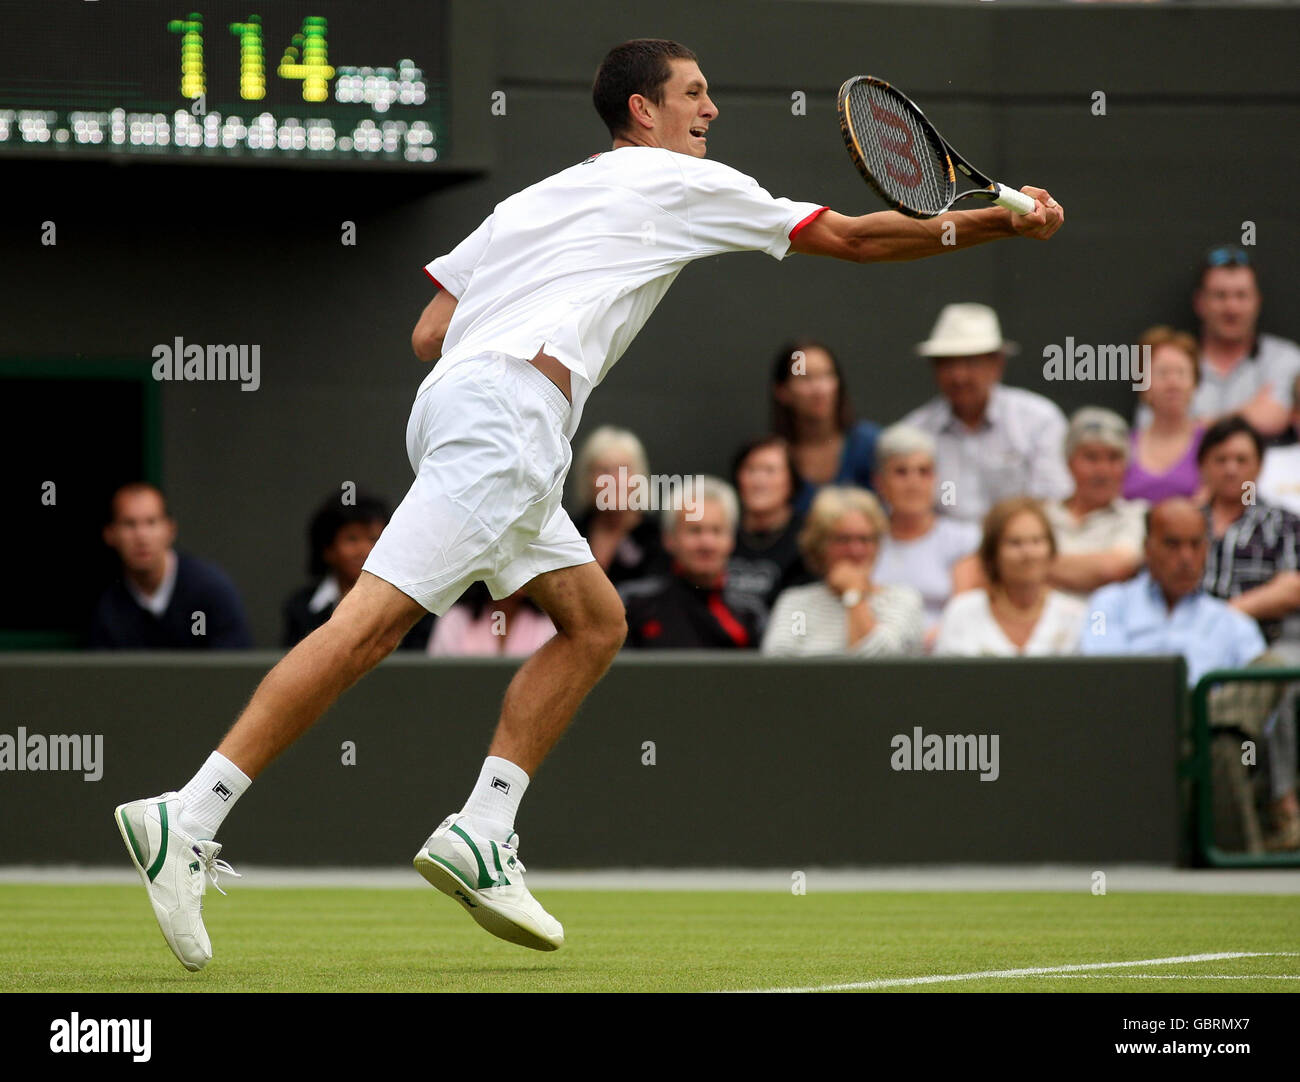 Great Britain's James Ward in action against Spain's Fernando Verdasco during the 2009 Wimbledon Championships at the All England Lawn Tennis and Croquet Club, Wimbledon, London. Stock Photo